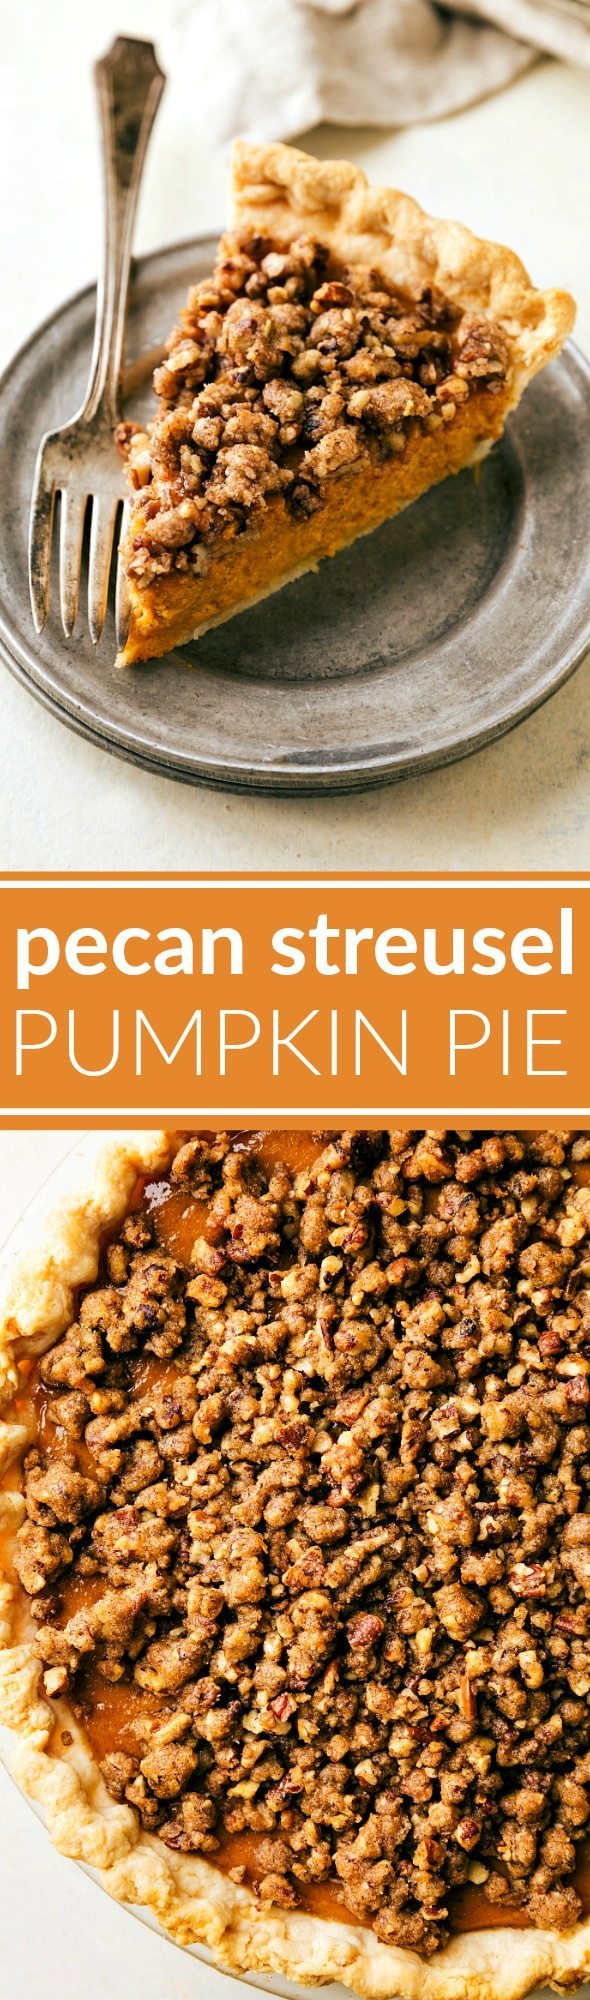 A simple-to-make (no hand mixers or stand mixers required!) pumpkin pie with a delicious sugary-pecan streusel. The (optional) two-ingredient maple whipped topping takes this pie over the top! via chelseasmessyapron.com